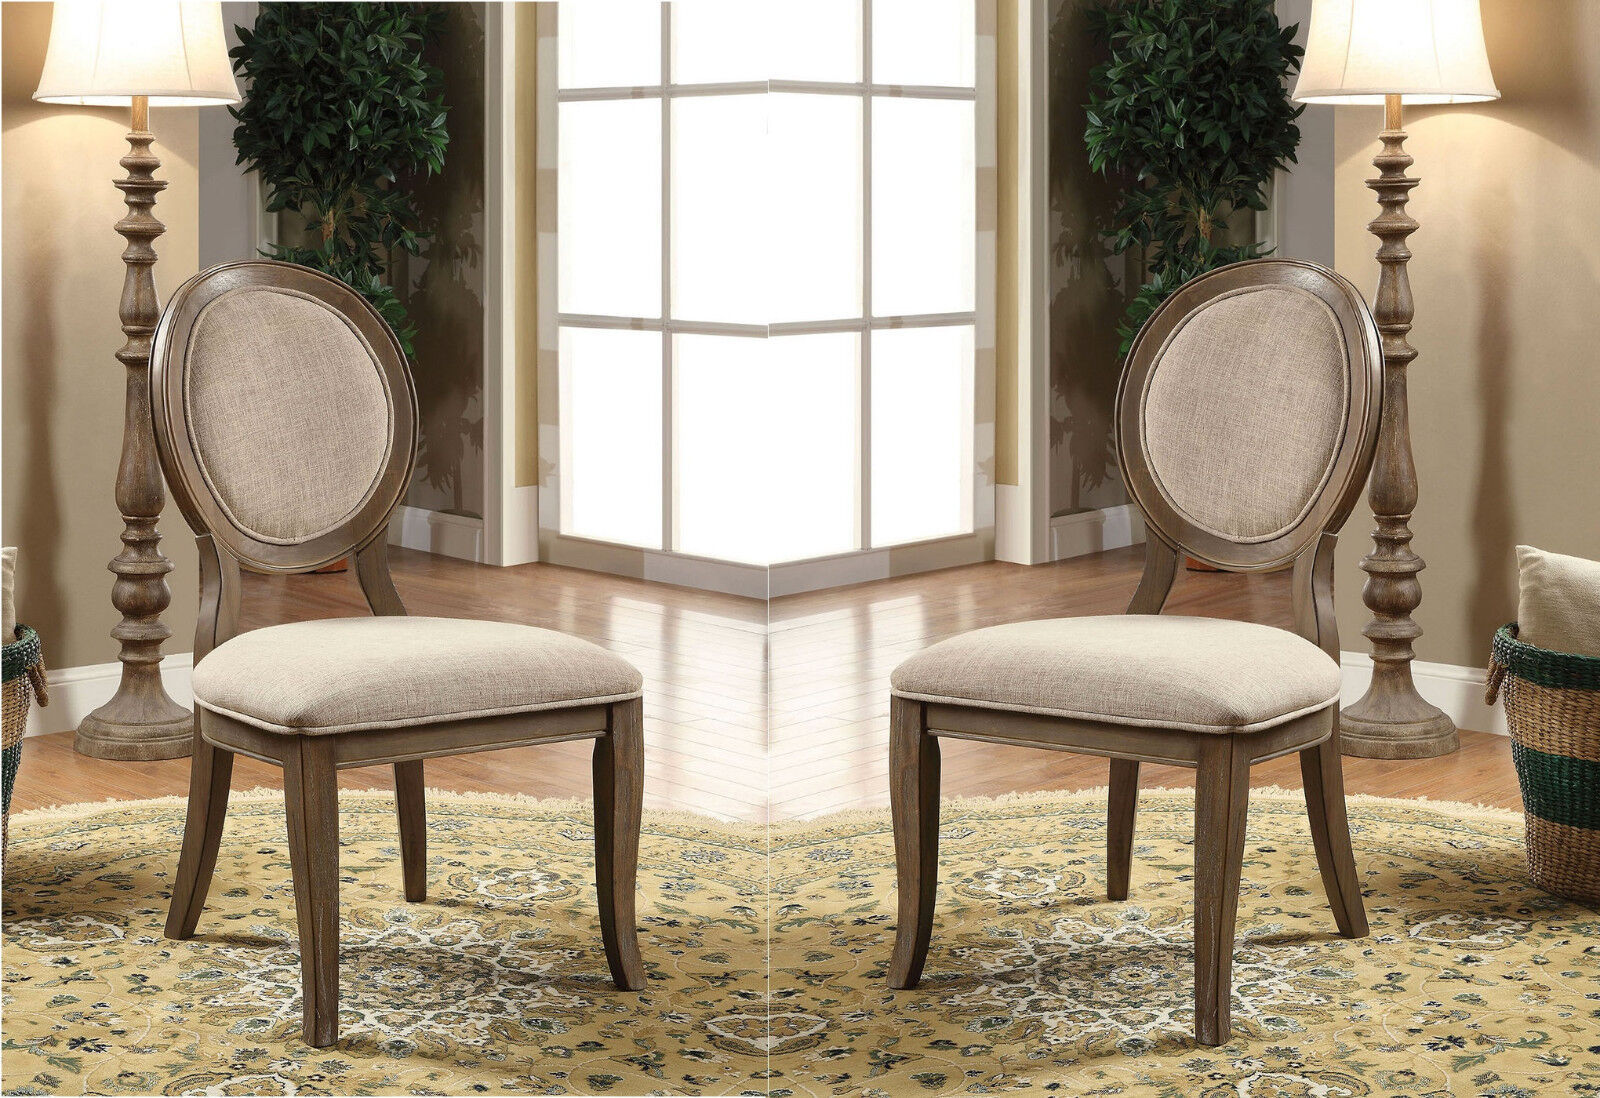 Transitional Rustic Oak and Beige Side Chairs Set of 2 rustic-dining room-transitional-dining